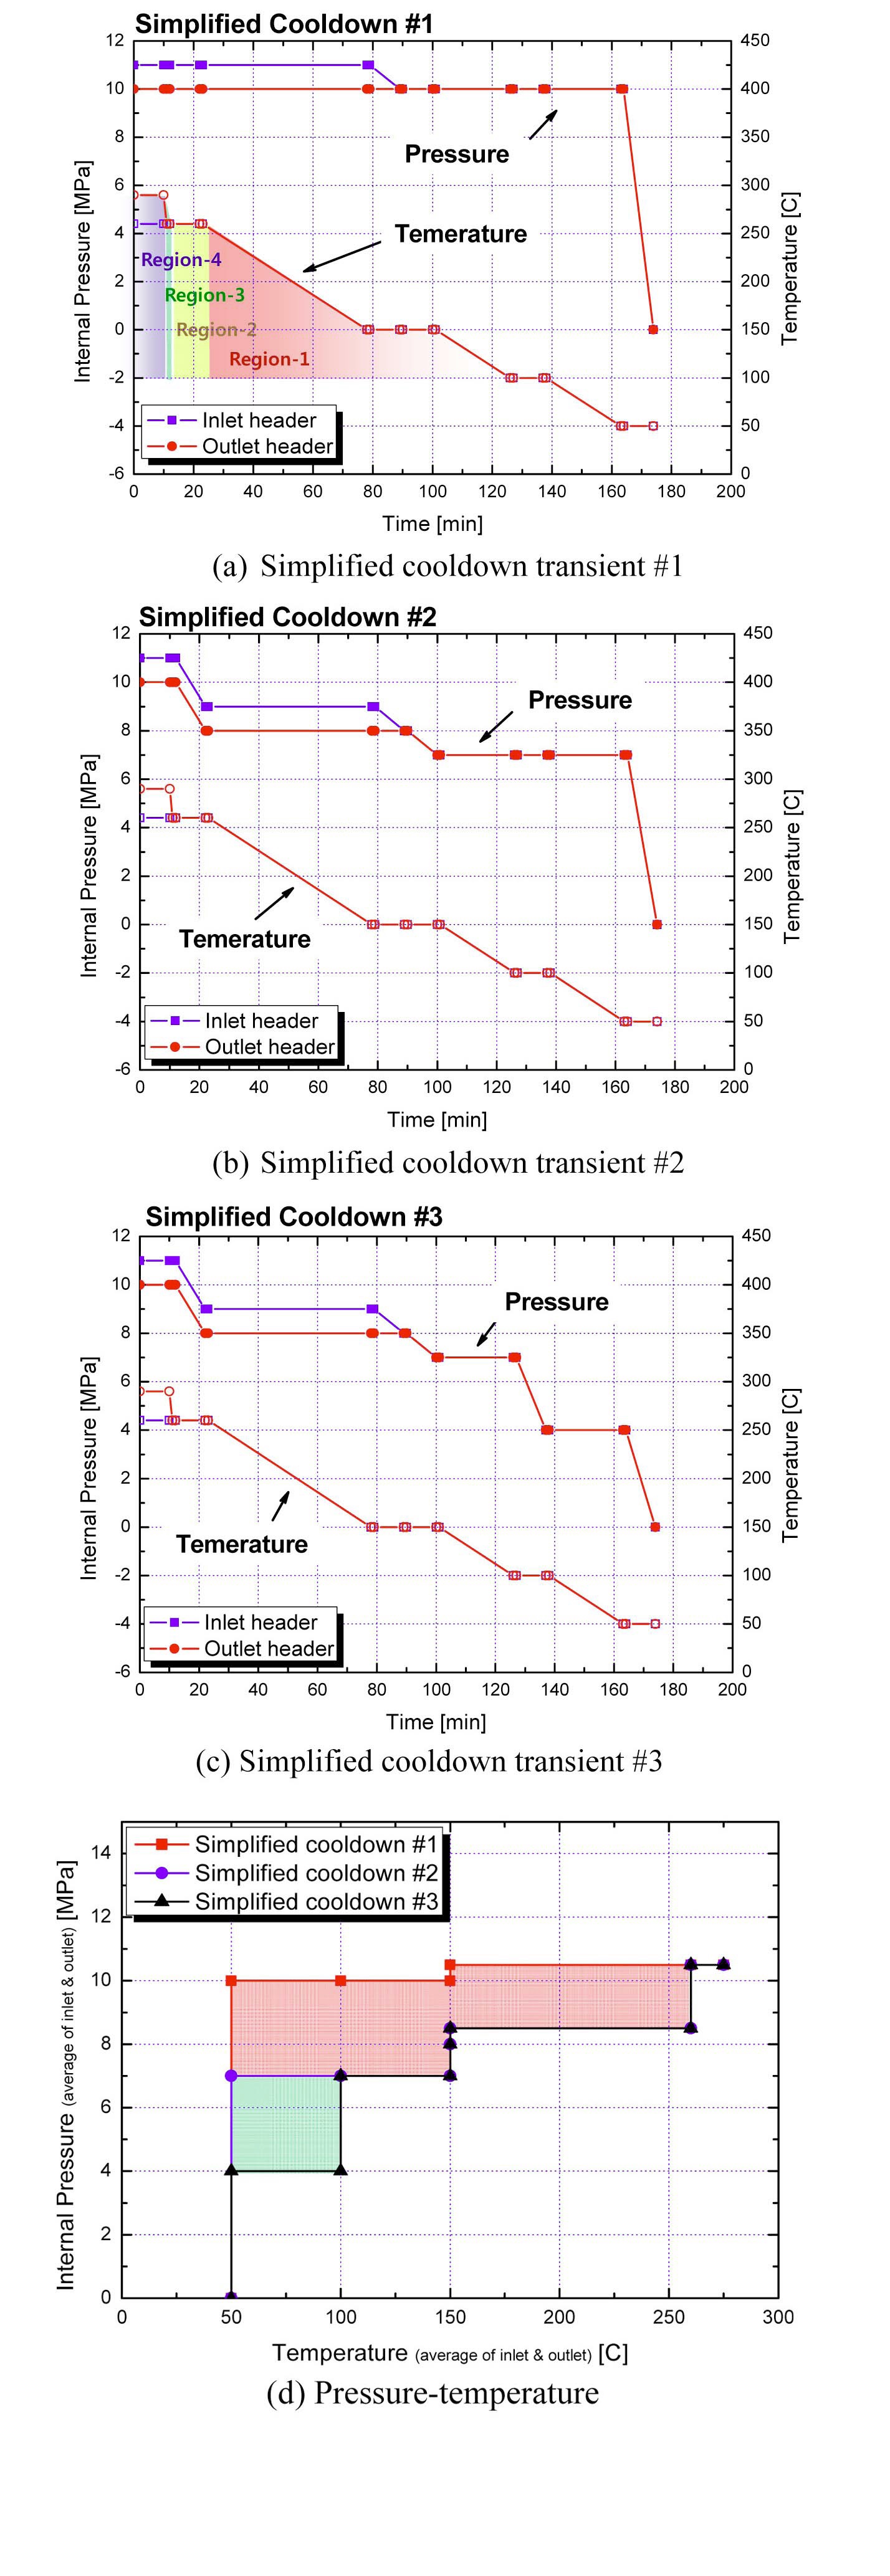 Simplified Hypothetical Cooldown Transients